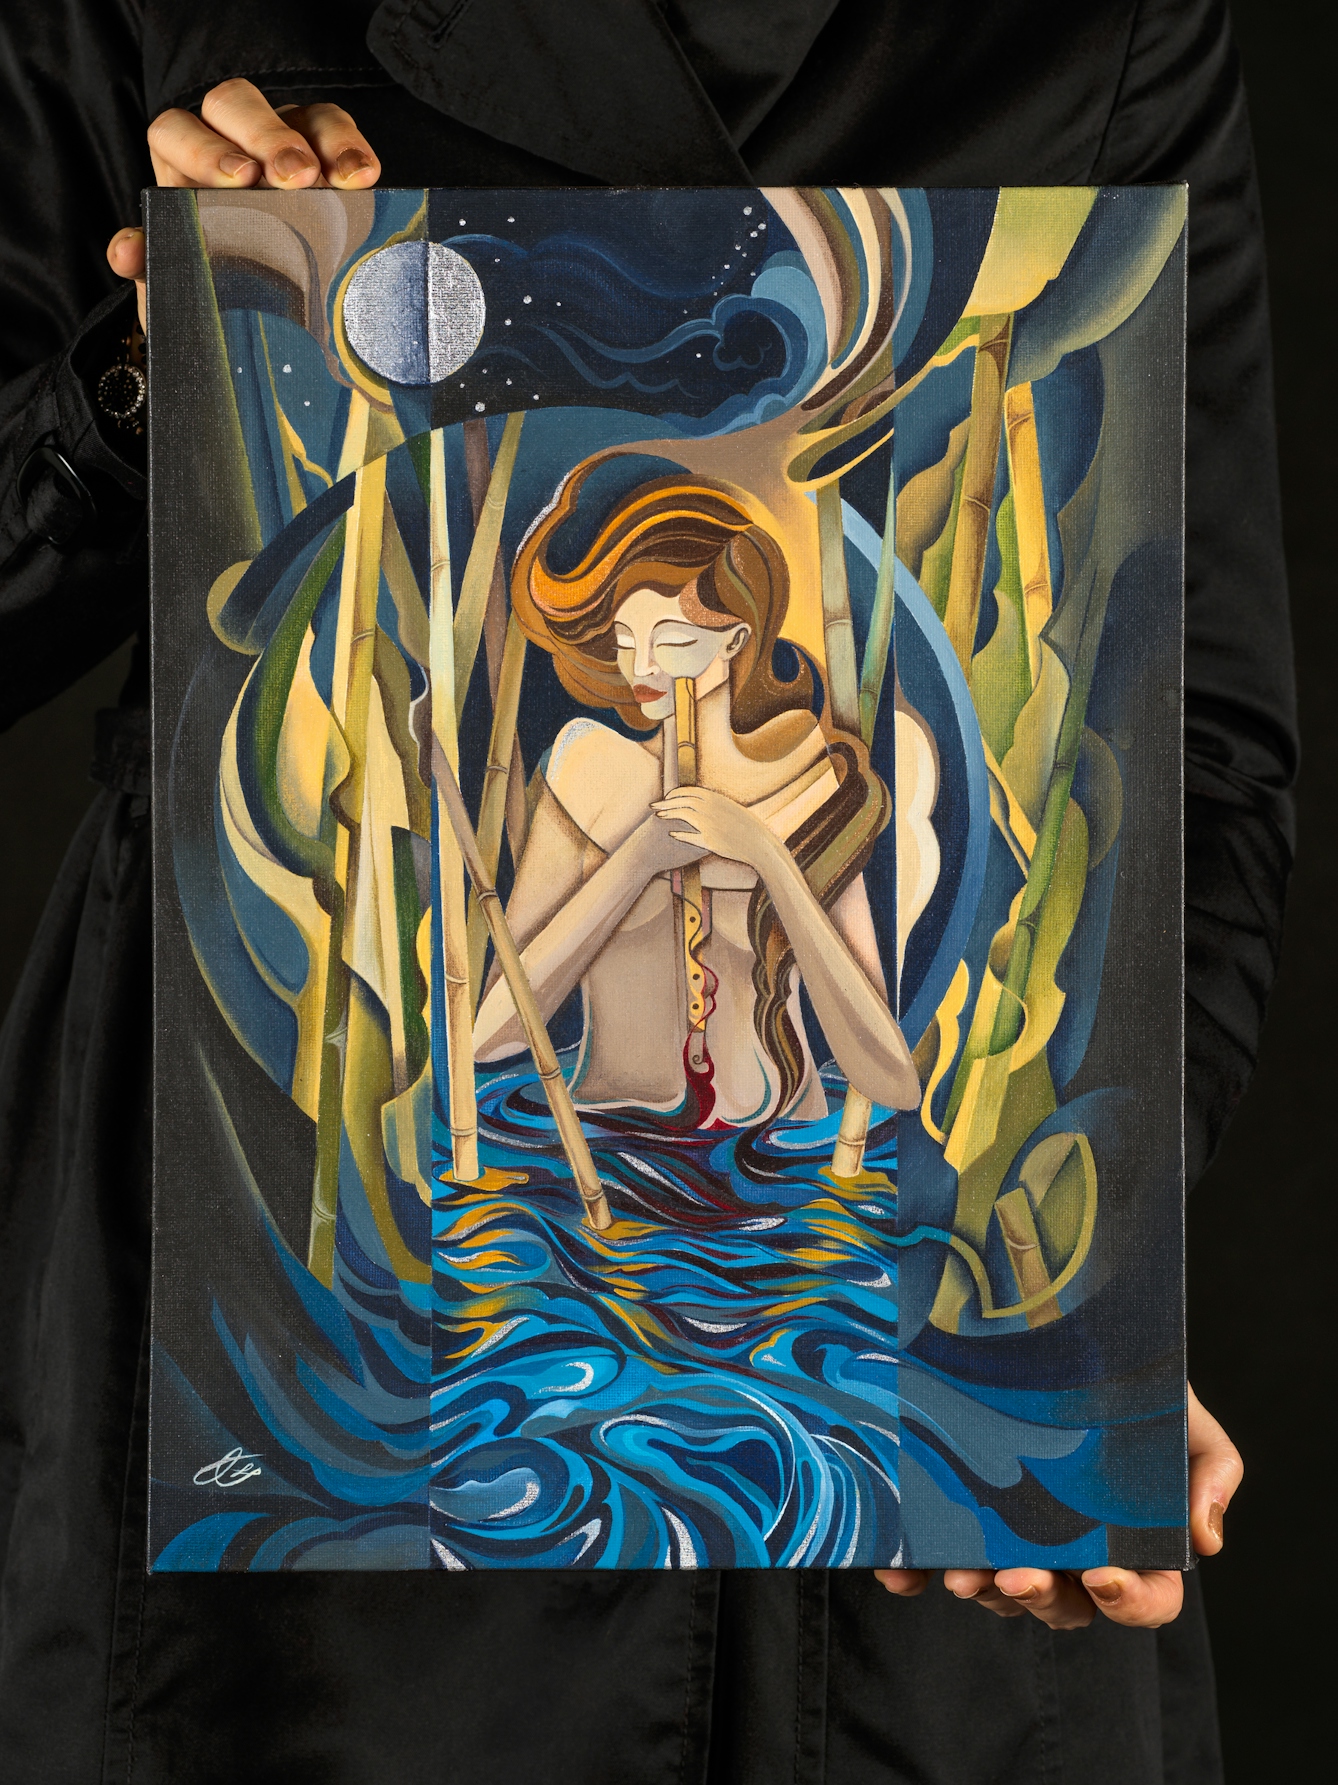 Photograph of a woman in a black dress holding a rectangular artwork. The woman's head can't be seen, just her torso and hands. The artwork is acrylic paint on canvas and shows a stylistic portrayal of a woman stood waist high in water. She is surrounded in the water by reeds and a bright moon shines down from the night sky above her. She seems to be holding a cut stem from one of the reeds, which she is holding in front of her in both hands. Her eyes are closed.